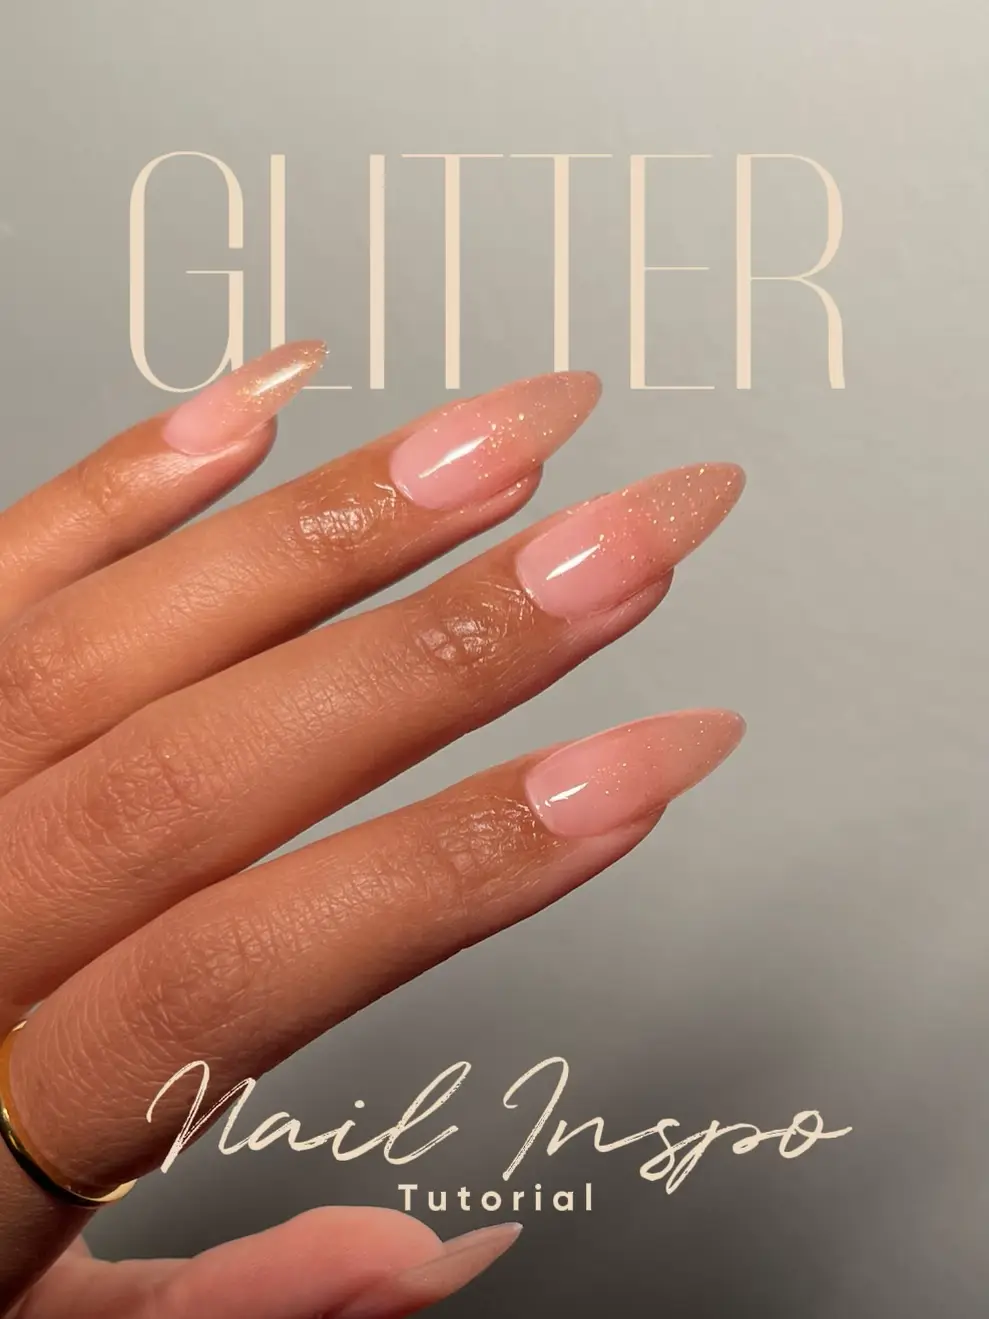 Chunky Glitter Tips Wanted : r/DipPowderNails